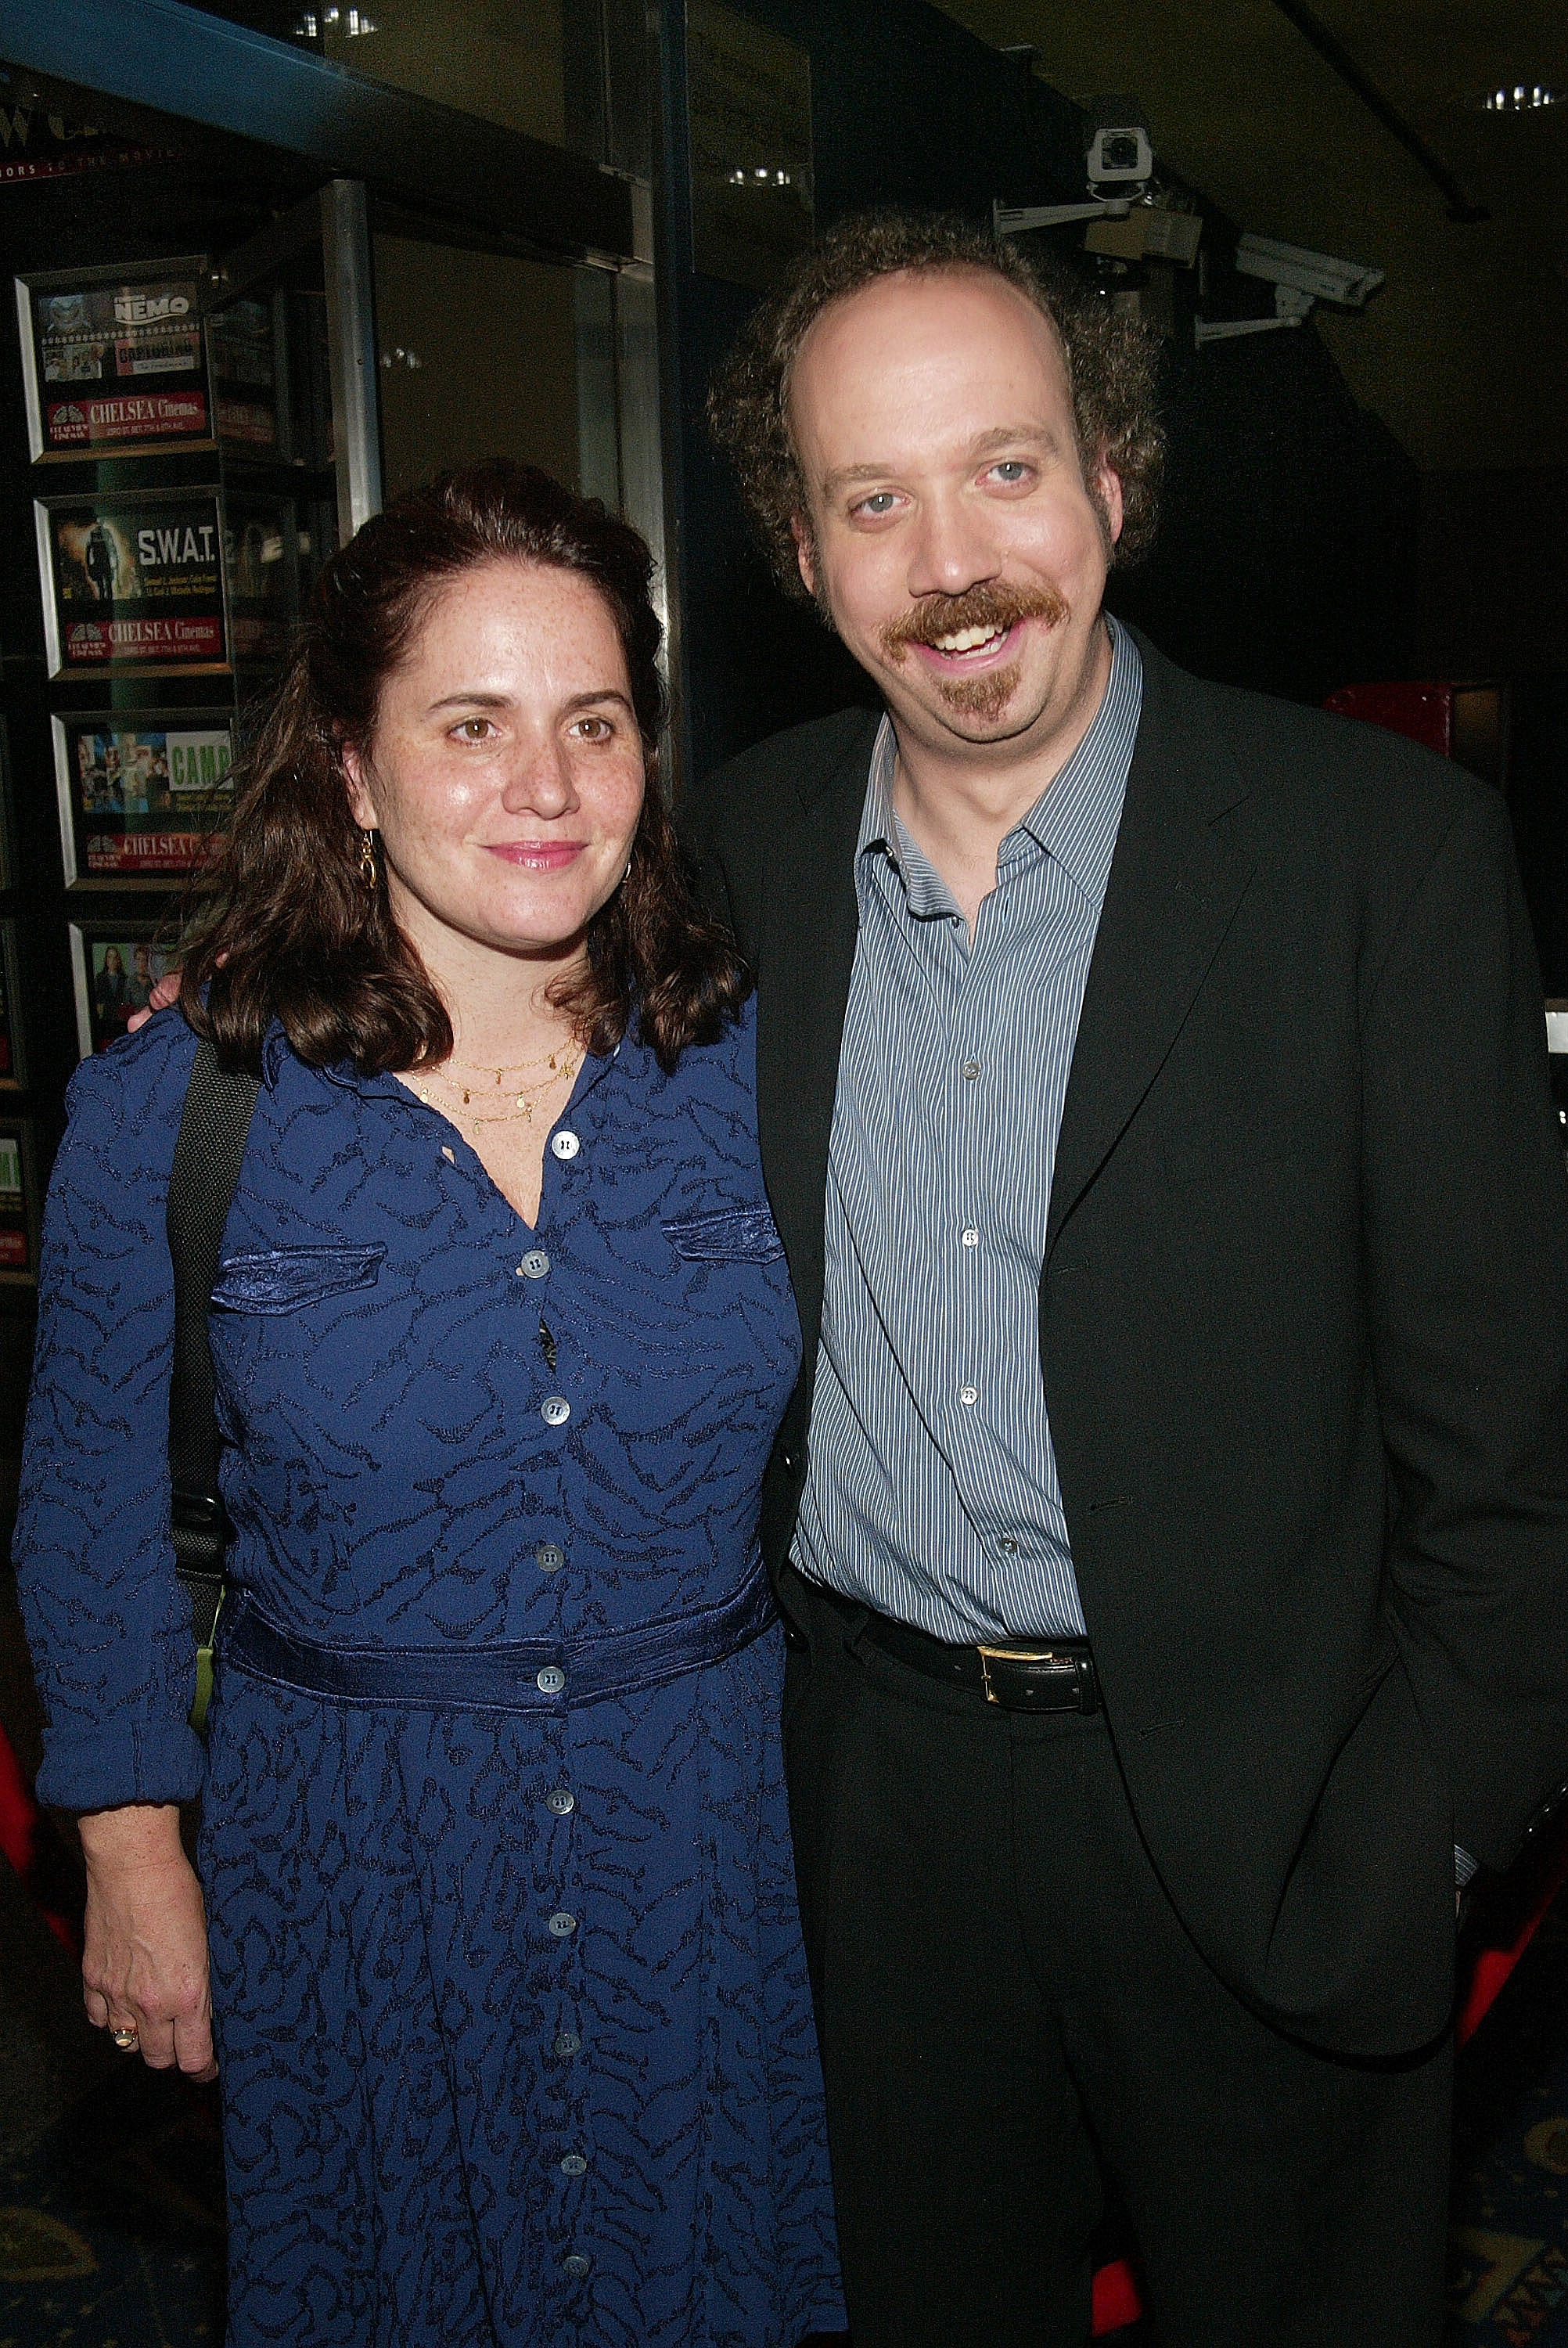 Paul Giamatti and Elizabeth Cohen Giamatti attend the "American Splendor" film premiere at the Chelsea West Theater on August 12, 2003, in New York City. | Source: Getty Images